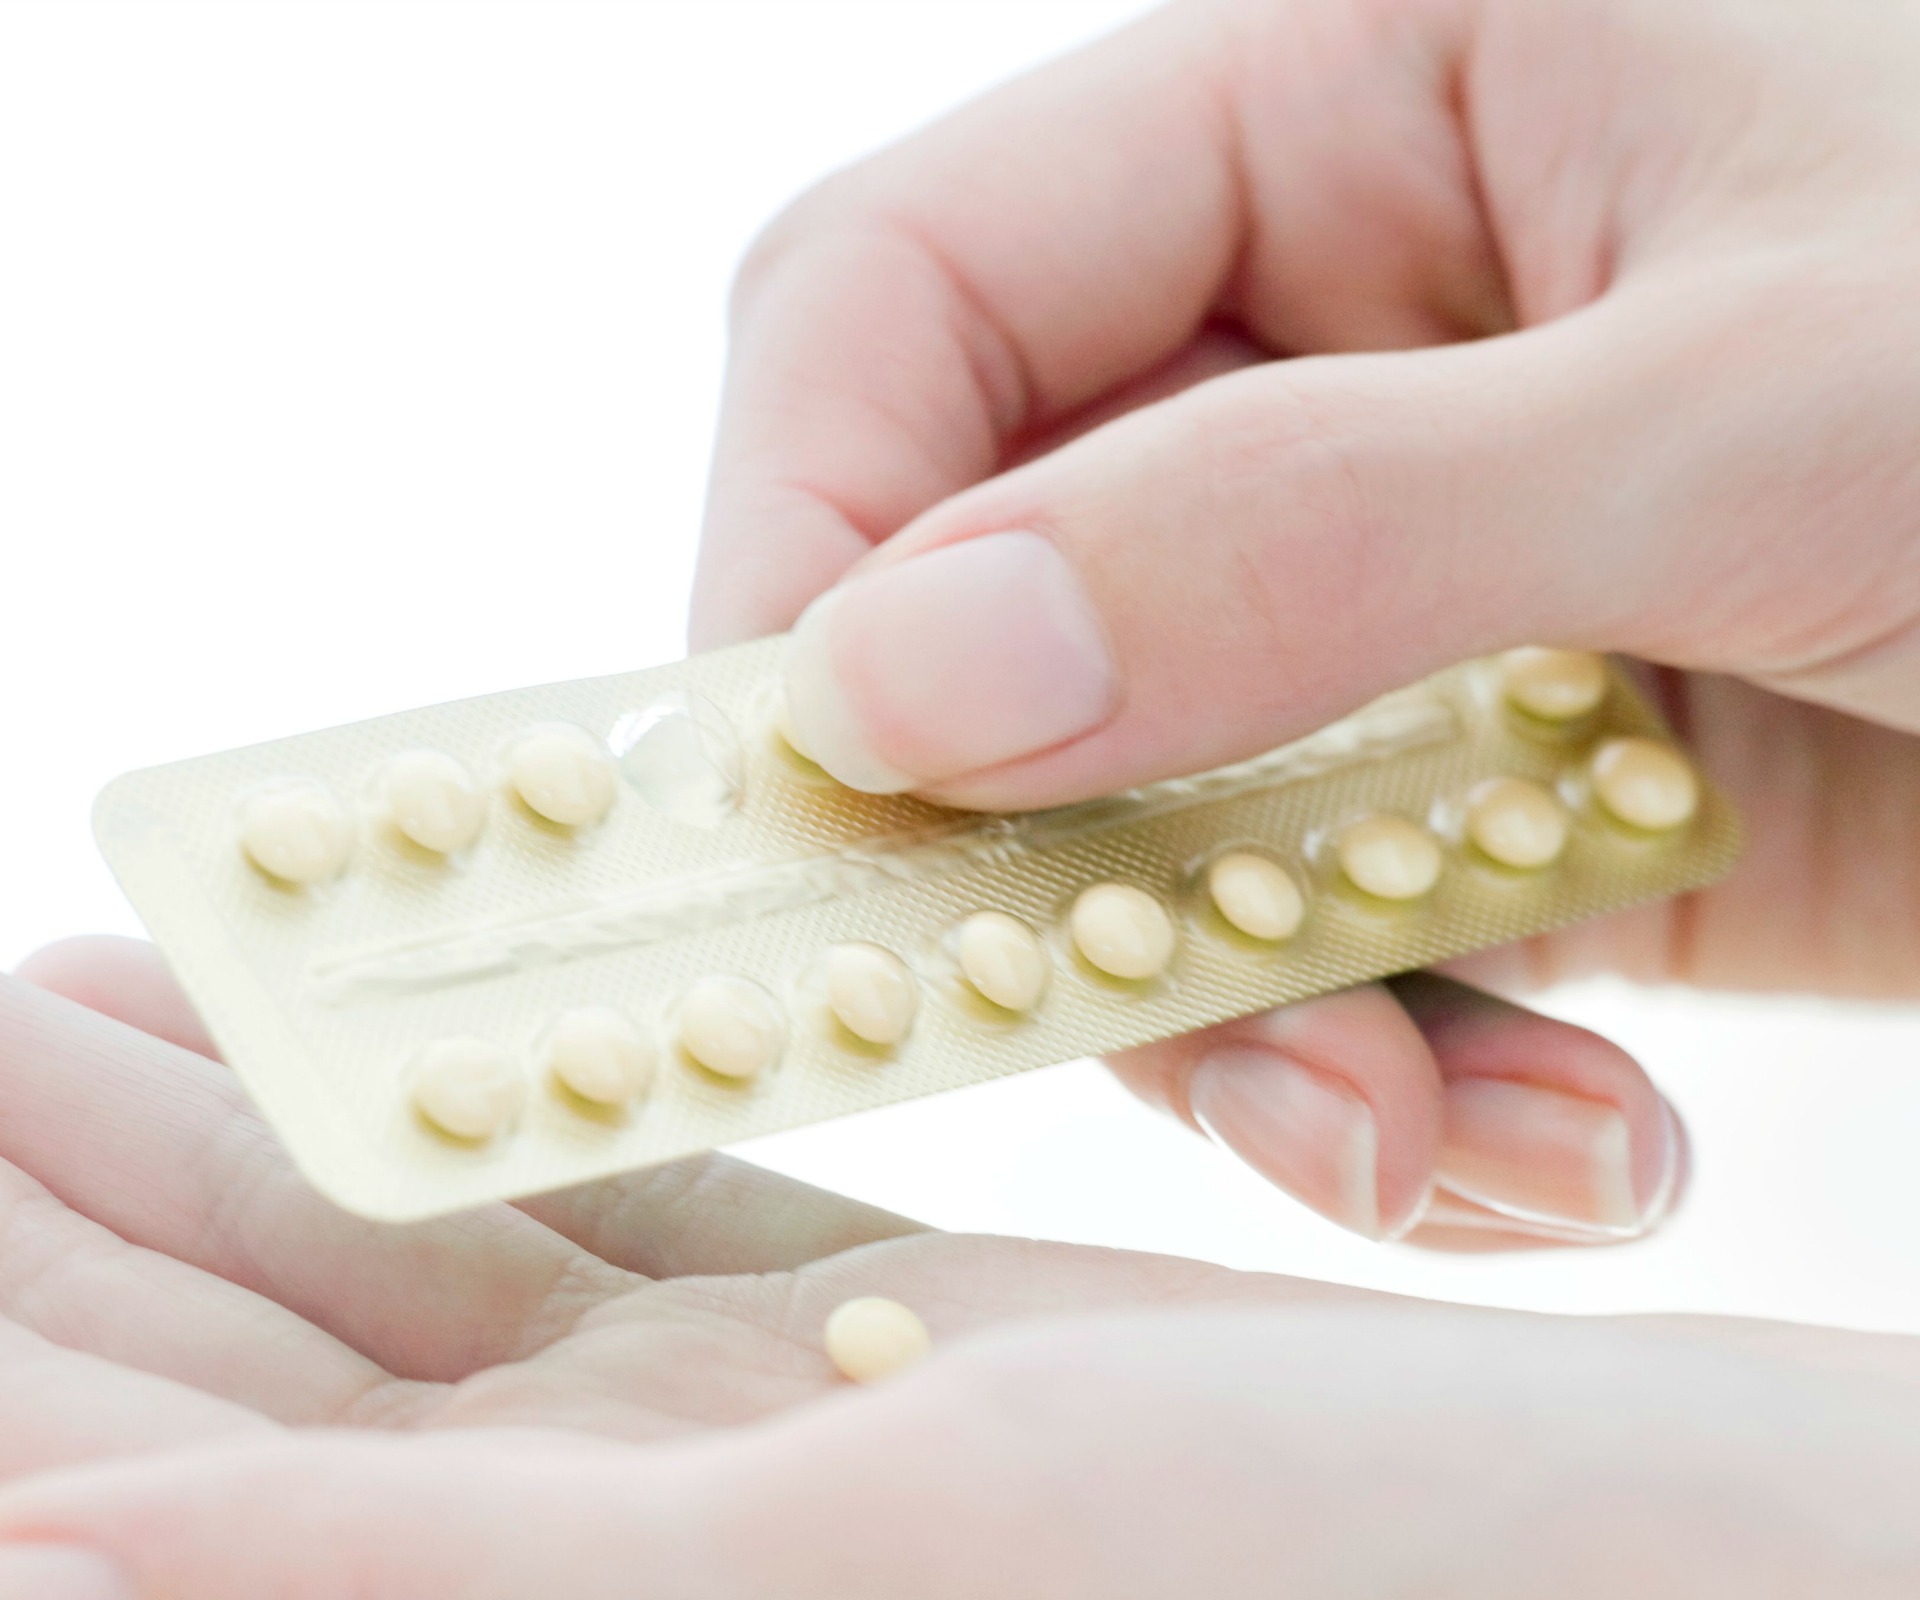 Morning after pill could be less effective in women over 75kgs